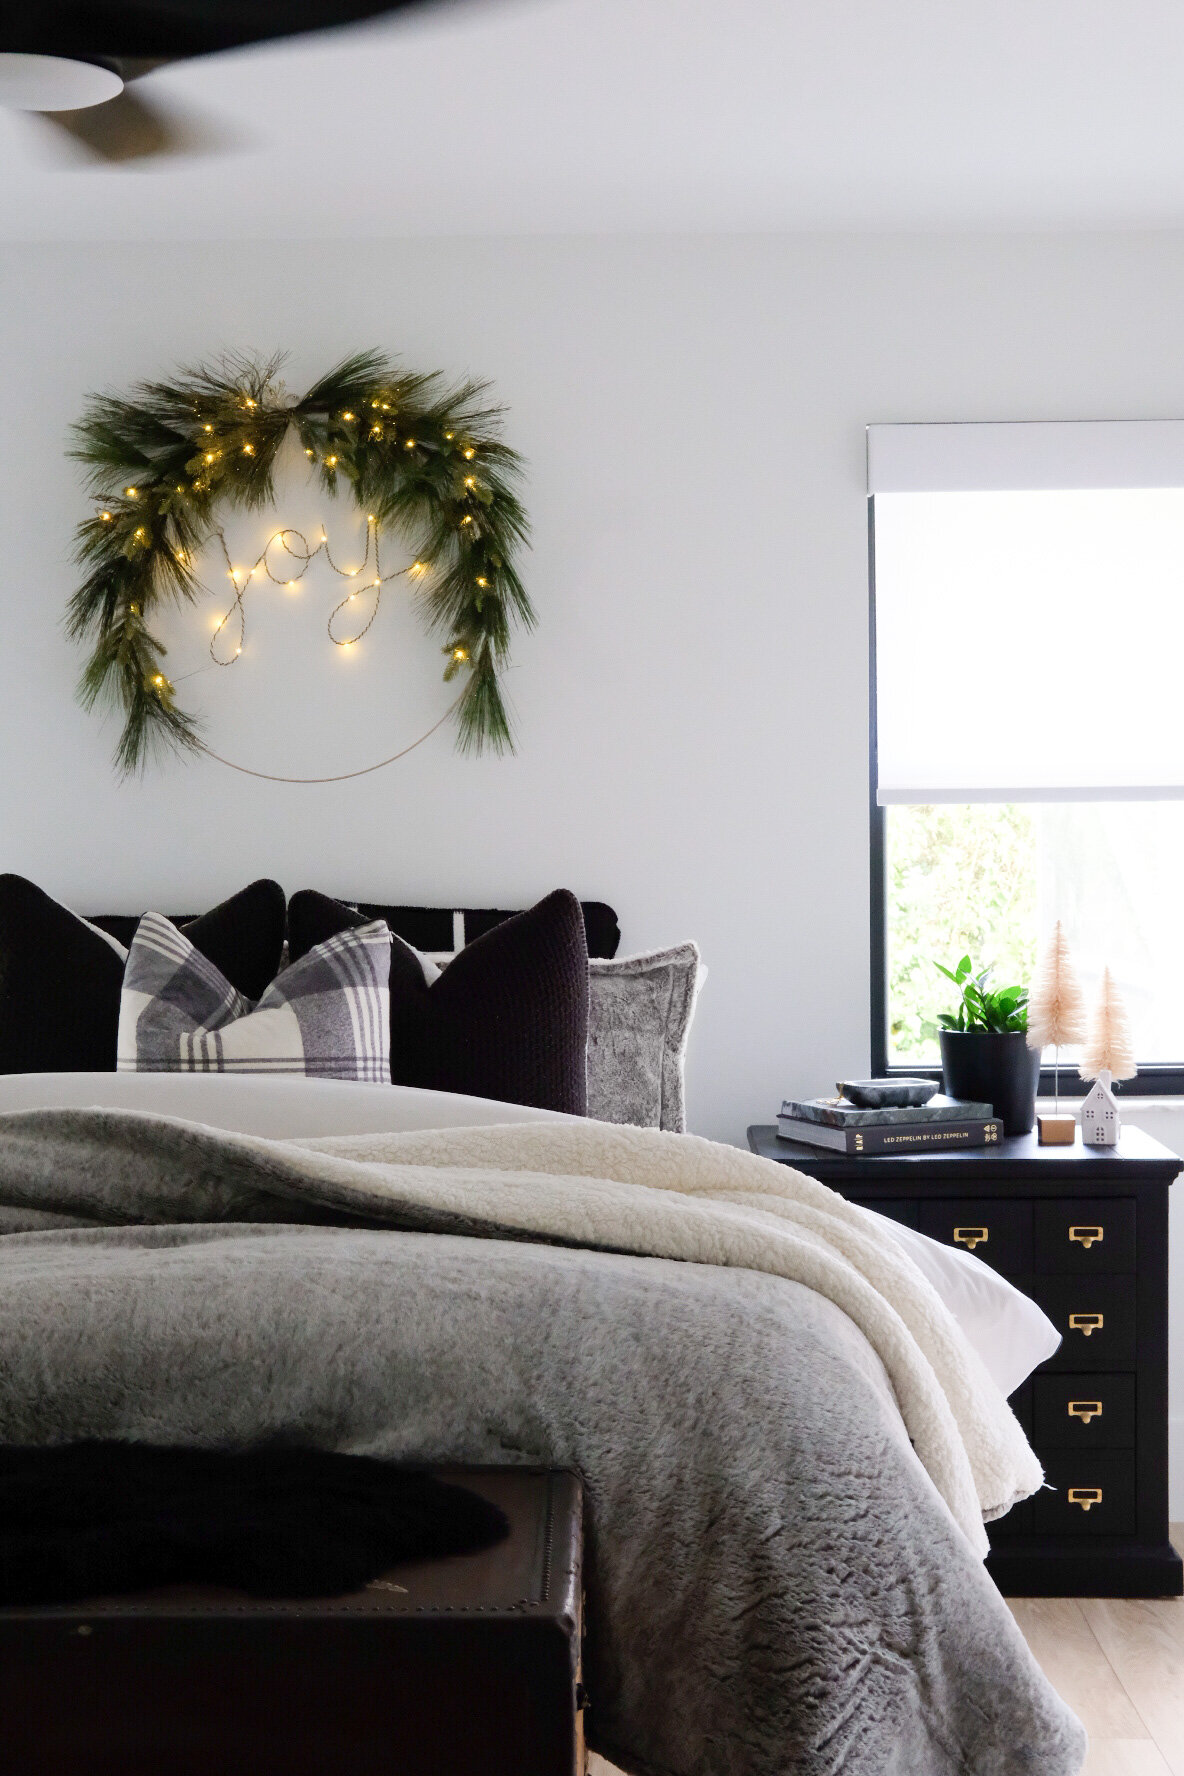 CHRISTMAS DECOR 2020 // OUR MASTER BEDROOM — Me and Mr. Jones